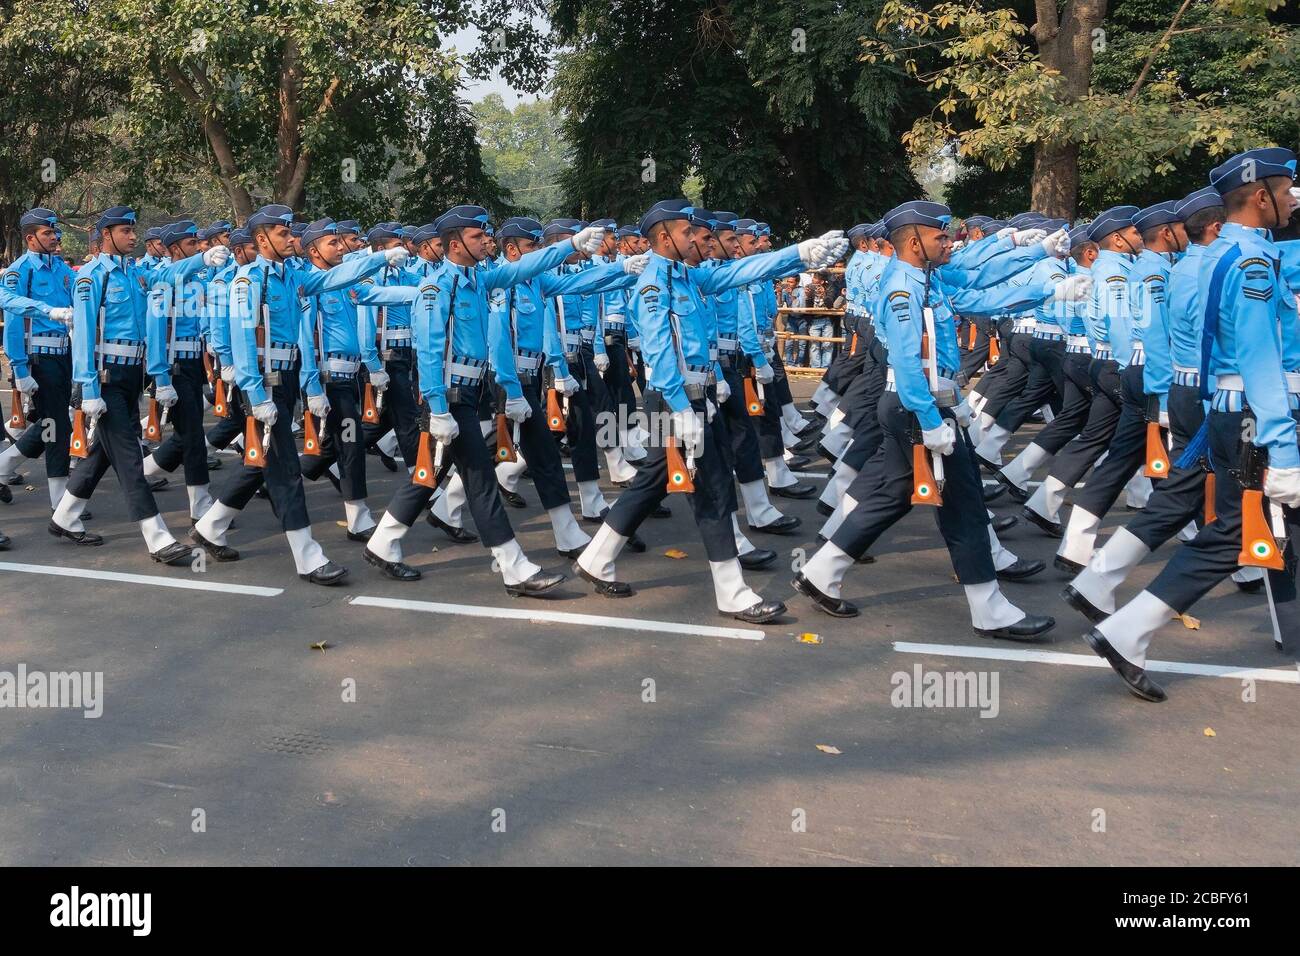 Kolkata, West Bengal, India - 26th Januaray2020 : Indian armed force Officers wearing blue dress are marching past with rifles, at Republic day parade Stock Photo